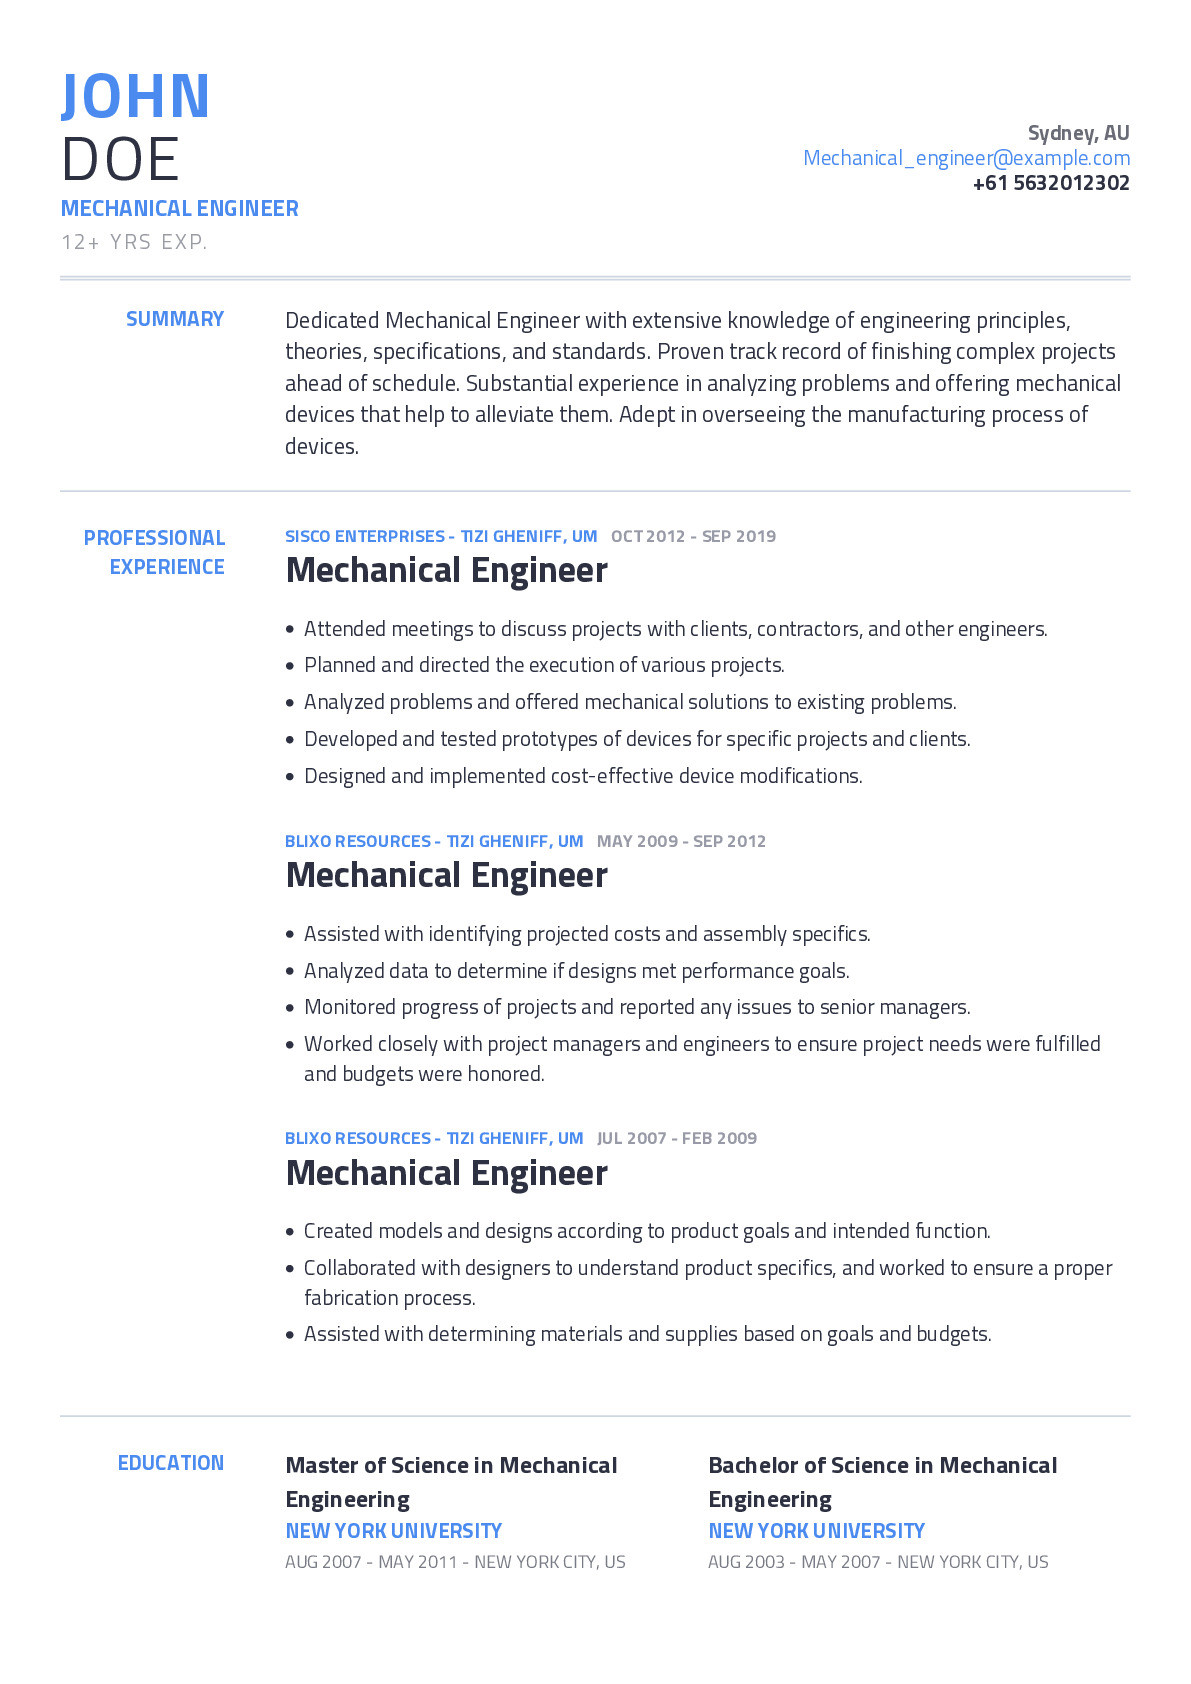 Mechanical Engineer Project Manager Resume Sample Mechanical Engineer Resume Example with Content Sample Craftmycv